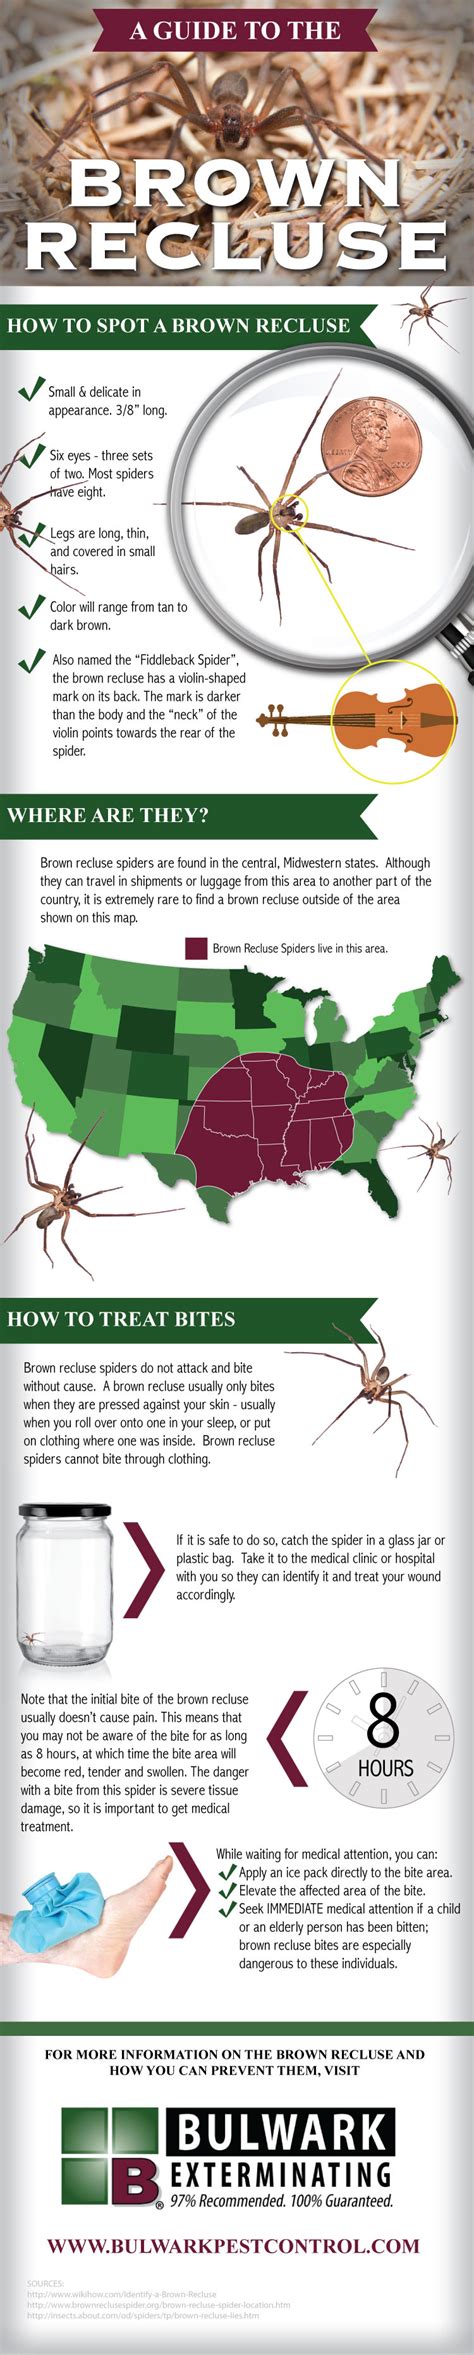 A Guide To The Brown Recluse Spider Infographic